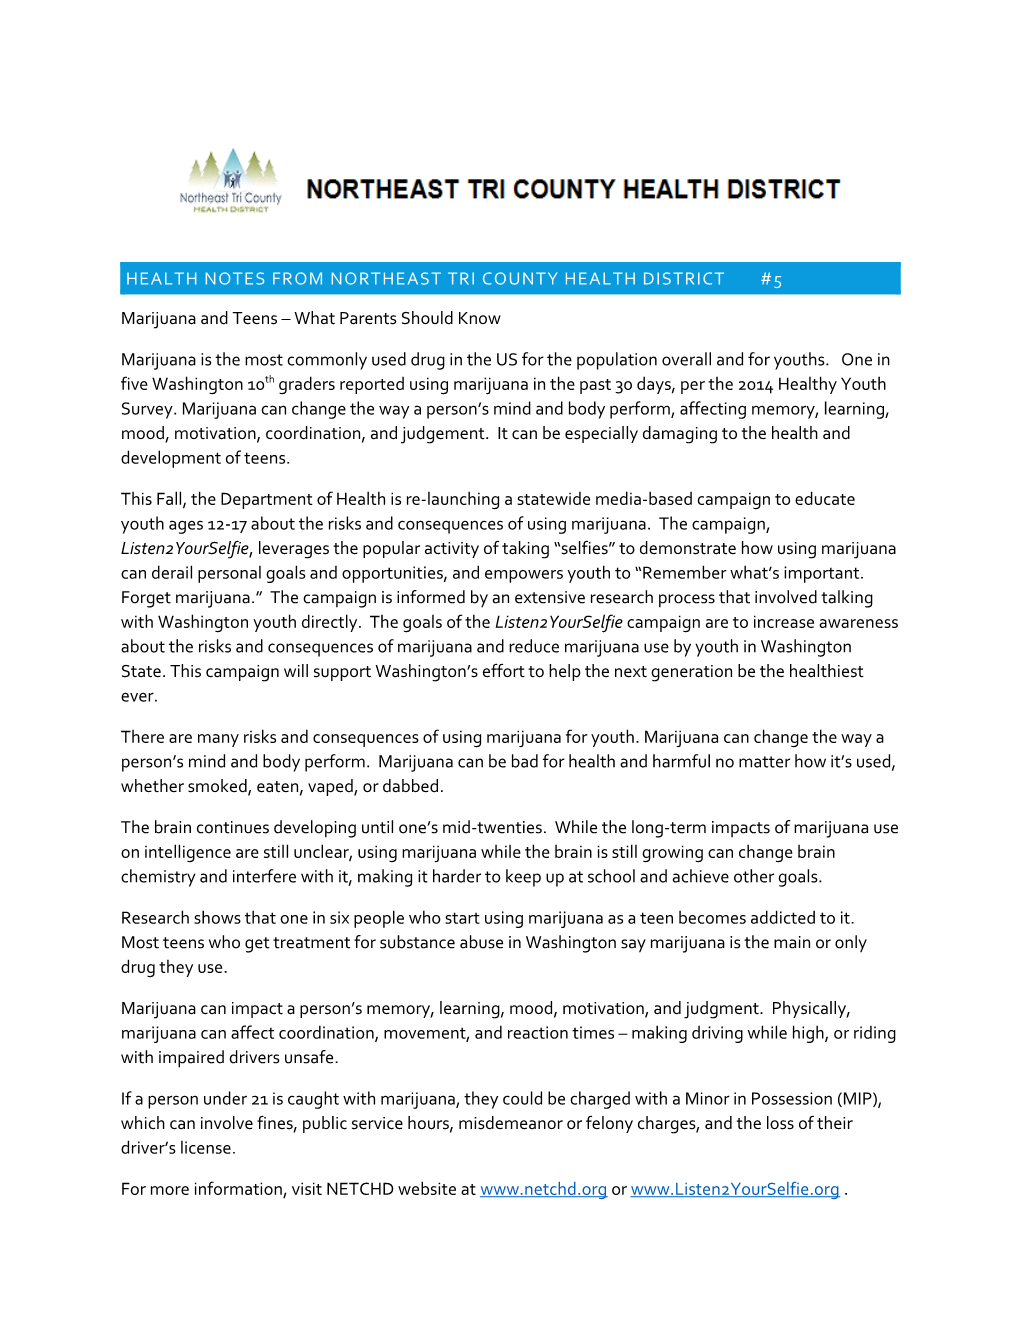 Health Notes from Northeast Tri County Health District #5